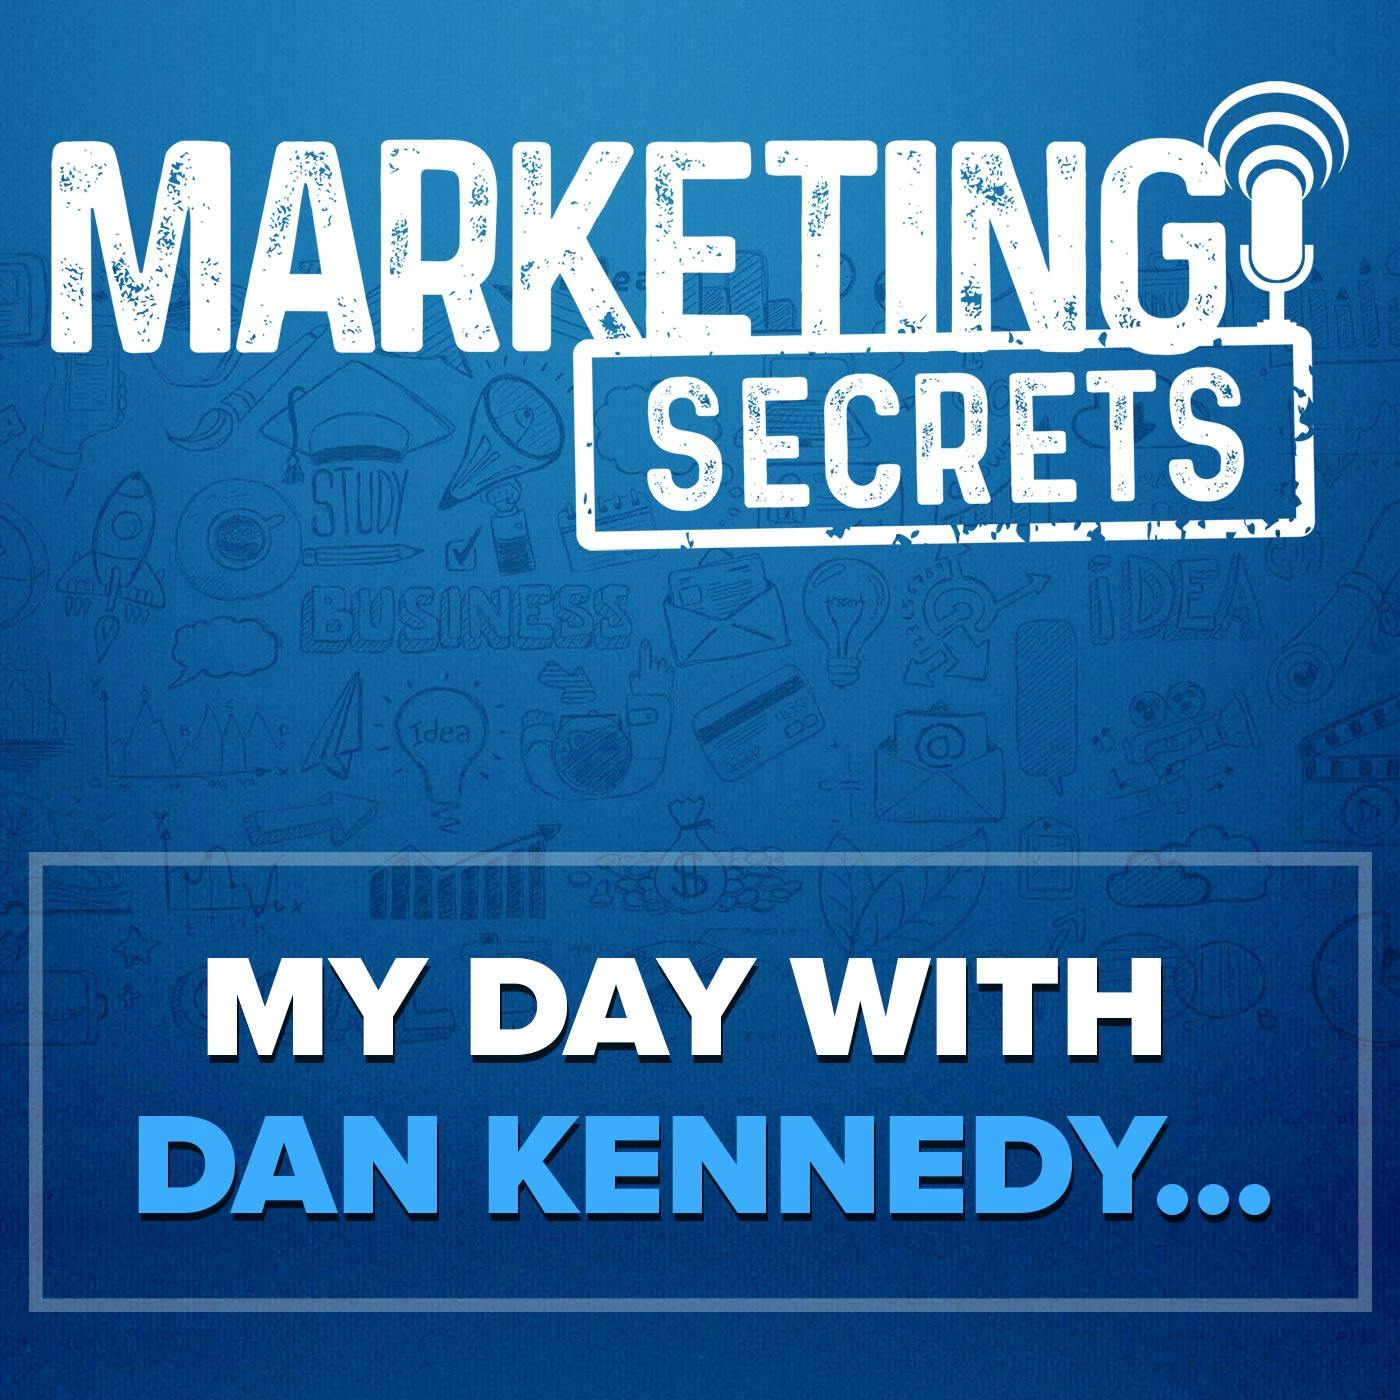 My Day With Dan Kennedy...